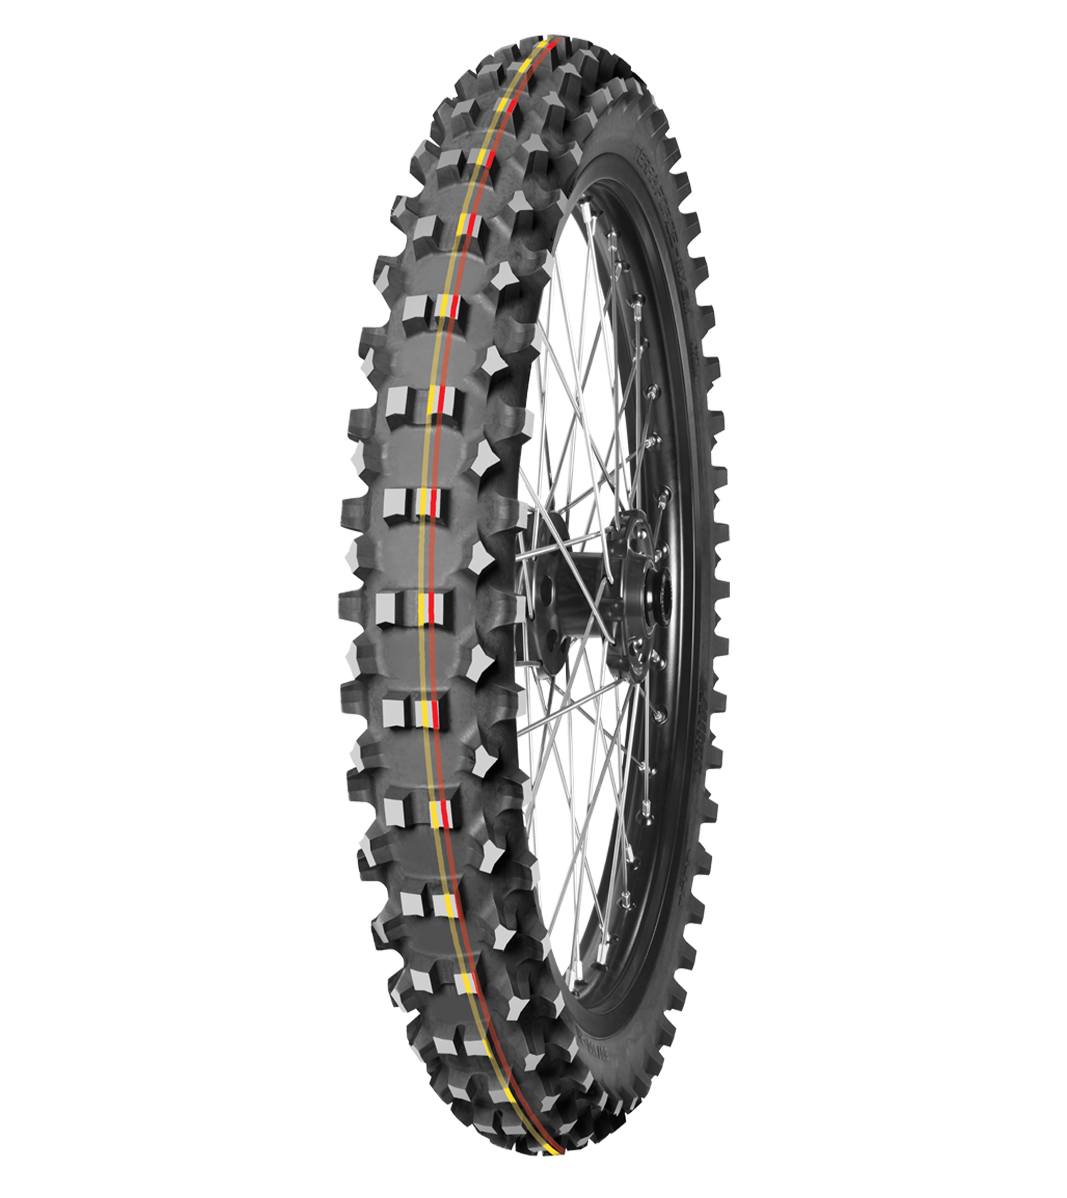 Mitas TERRA FORCE-MX SM 80/100-21 Motocross Competition Off-Road SOFT TO MEDIUM 51M Red & Yellow Tube Front Tire, 226731, 80/100-21, Front, Motocross, Motocross Competition, Off-Road, Terra Force, Terra Force-MX SM, Trail, Tires - Imported and distributed in North & South America by Lindeco Genuine Powersports - Premier Powersports Equipment and Accessories for Motorcycle Enthusiasts, Professional Riders and Dealers.